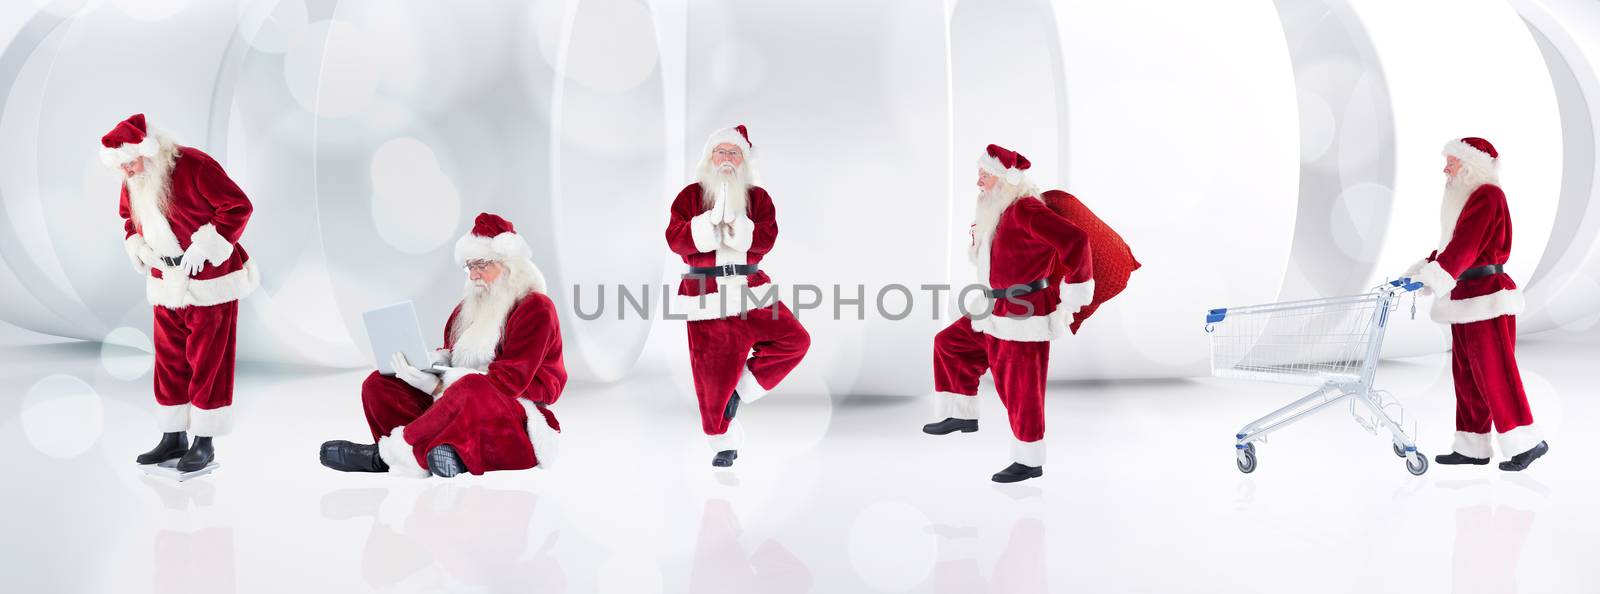 Composite image of different santas against lights twinkling in modern room